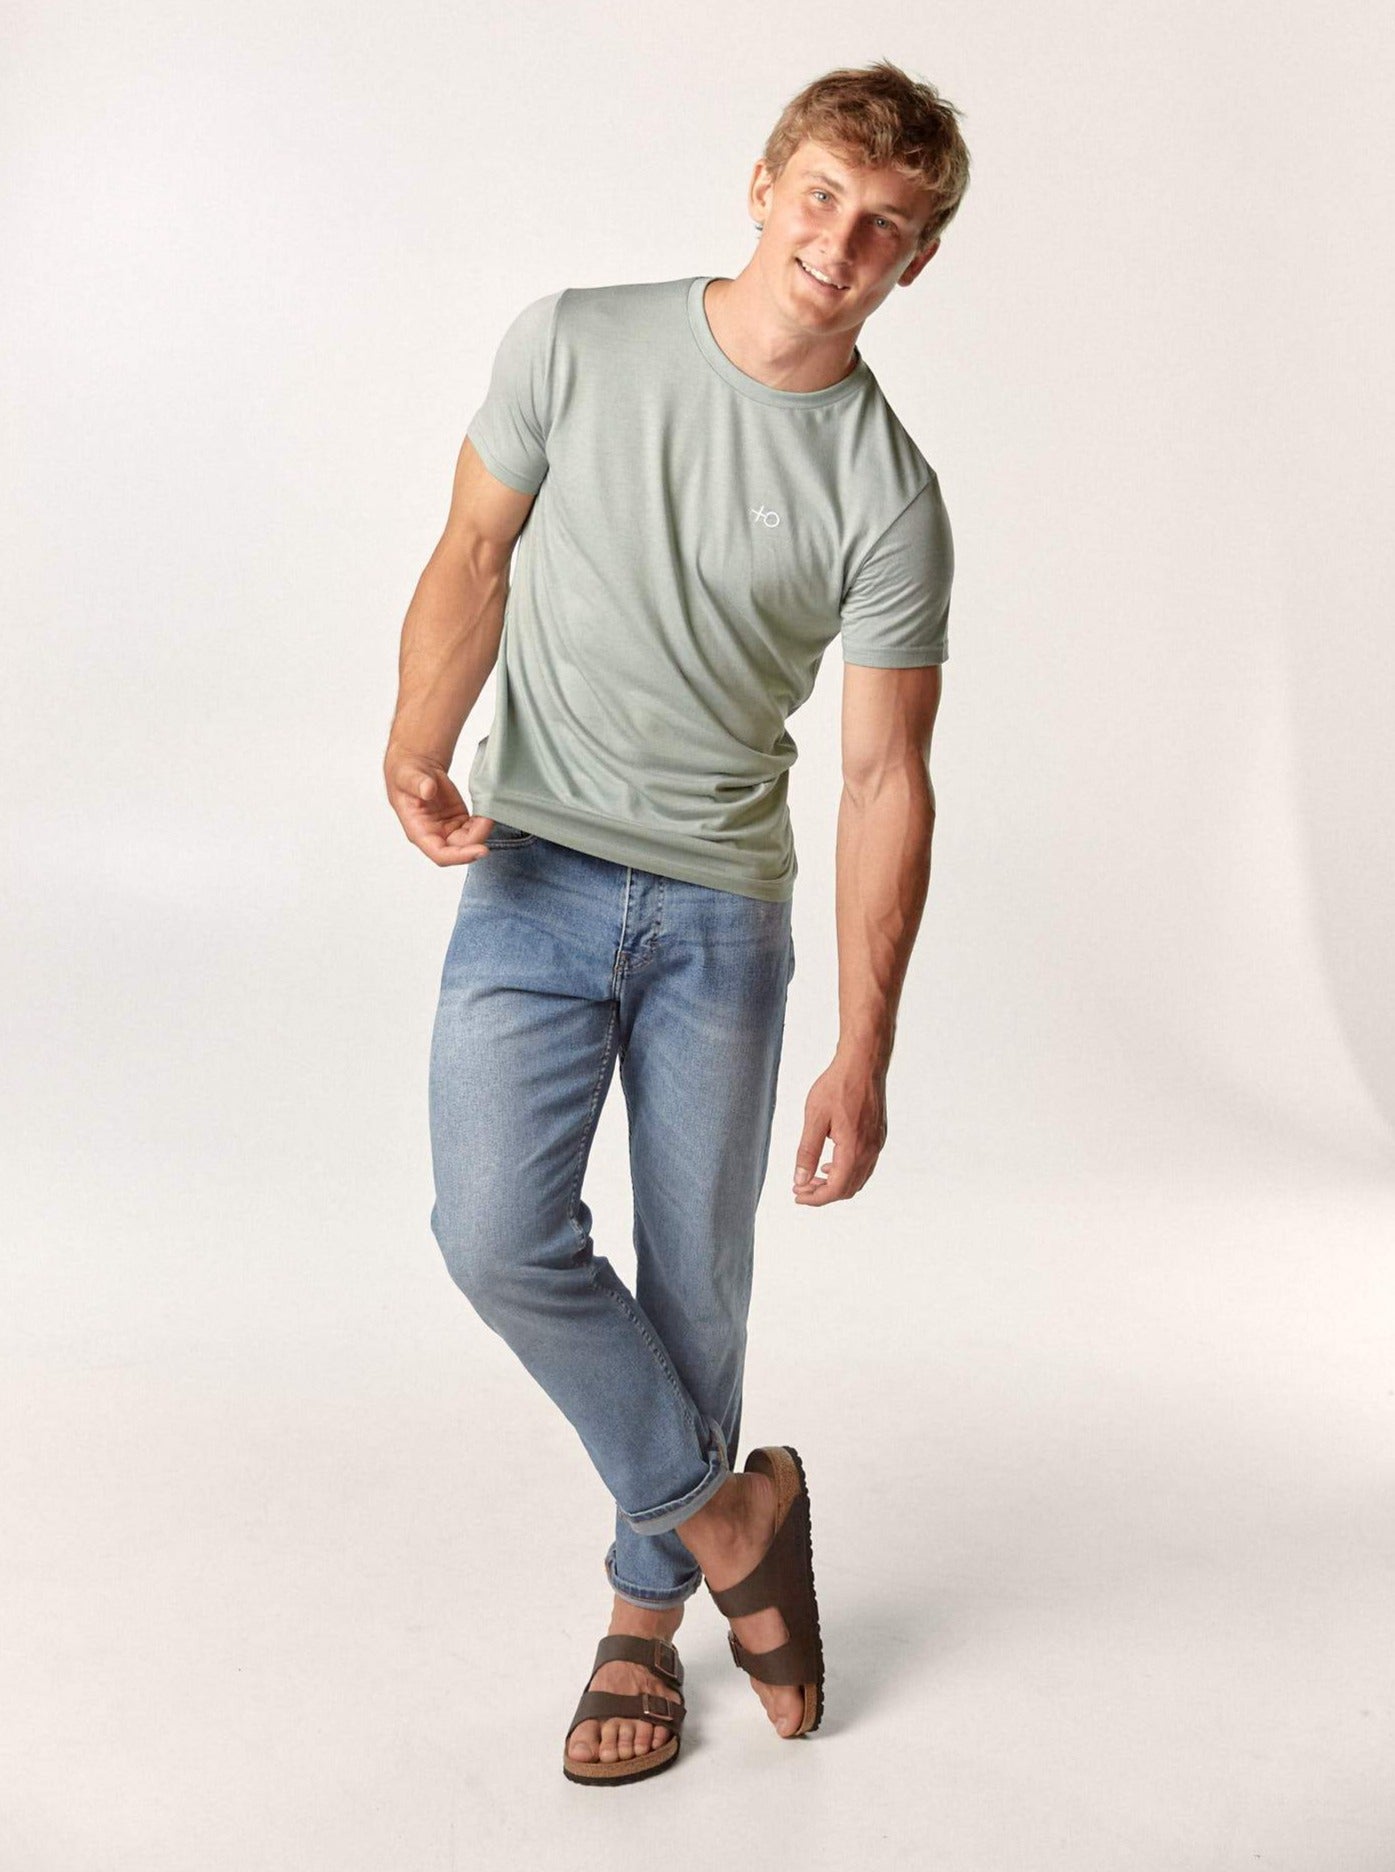 Bamboo Essential T - Soft Tones - PositiveOutlook